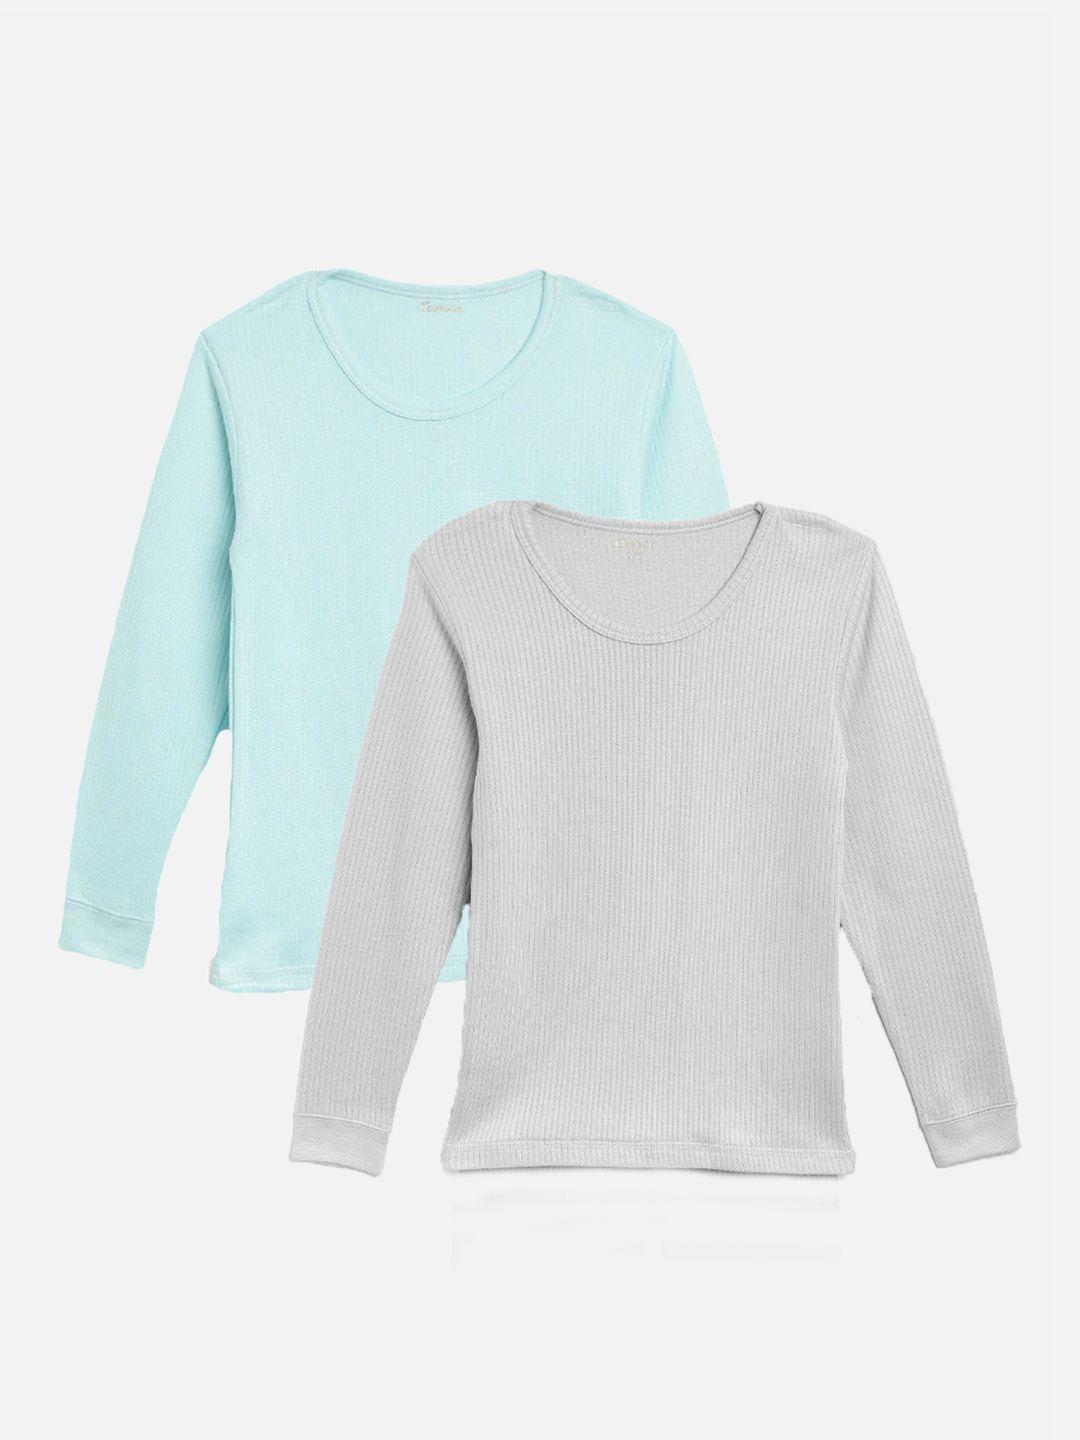 kanvin boys turquoise blue and grey pack of 2 solid thermal tops